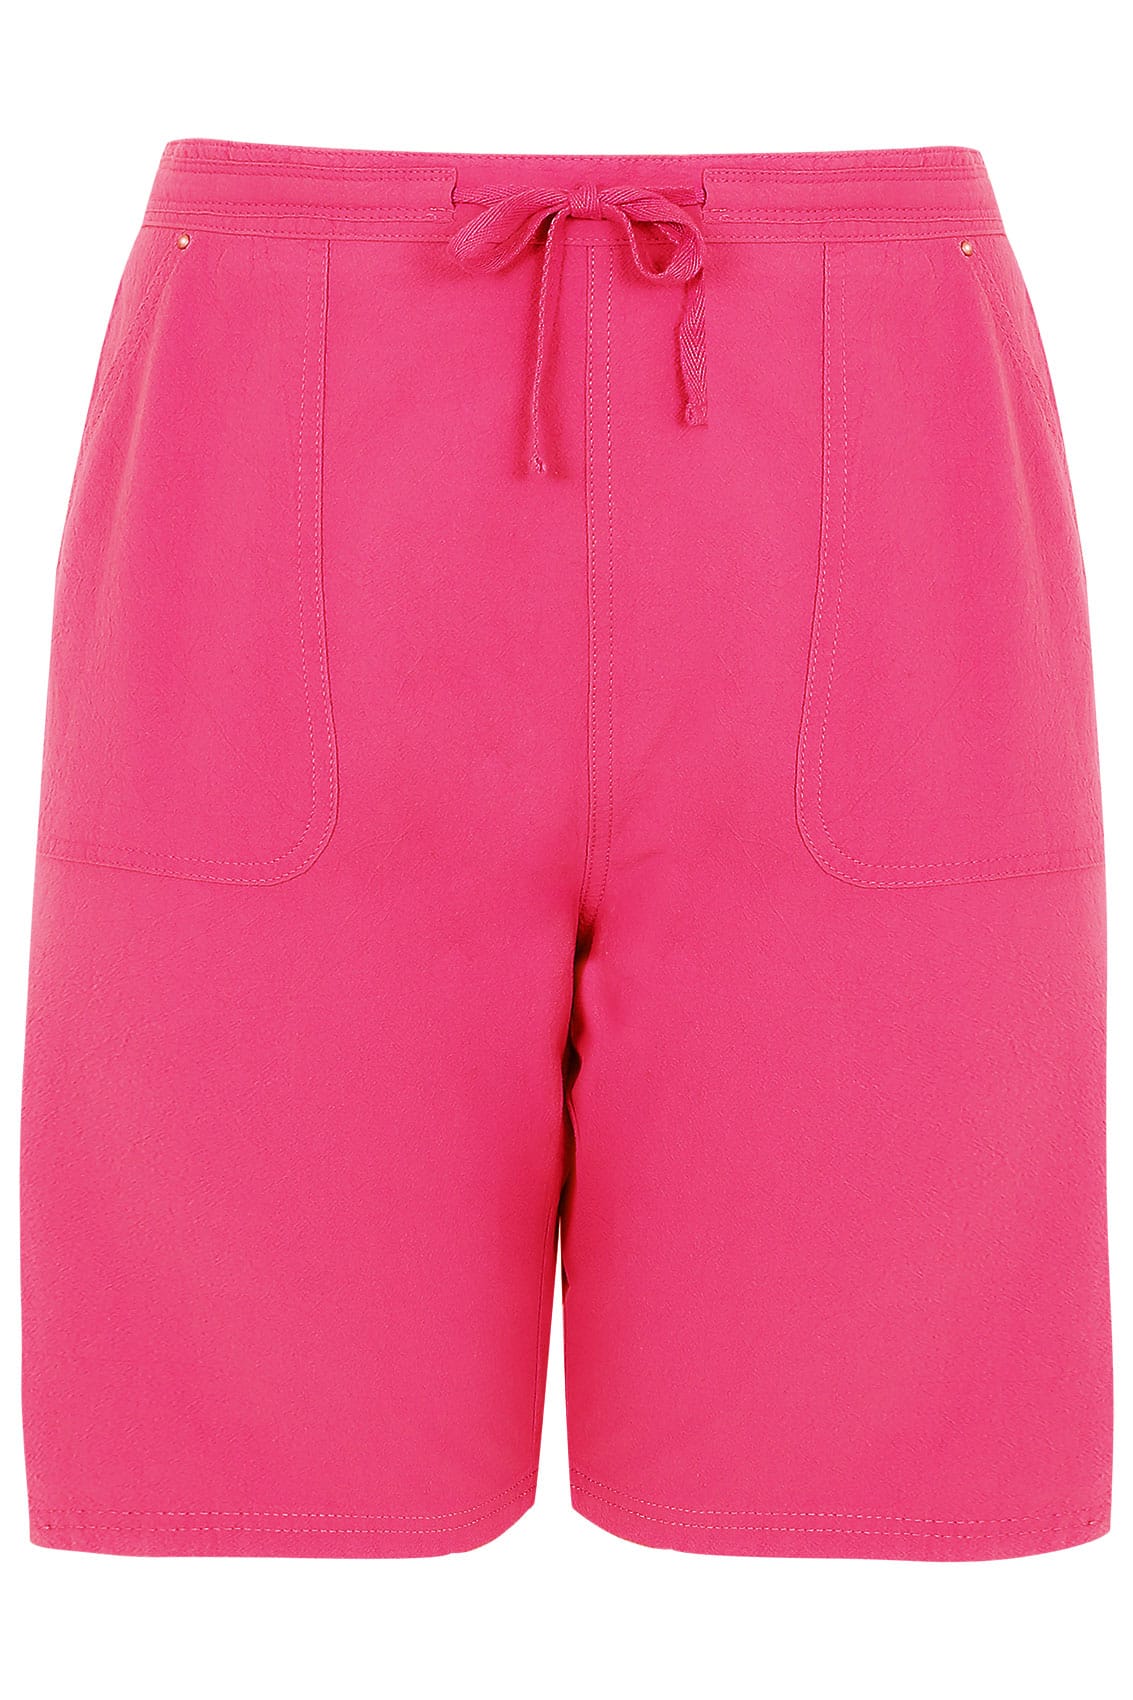 Hot Pink Cool Cotton Pull On Shorts, Plus size 16 to 36